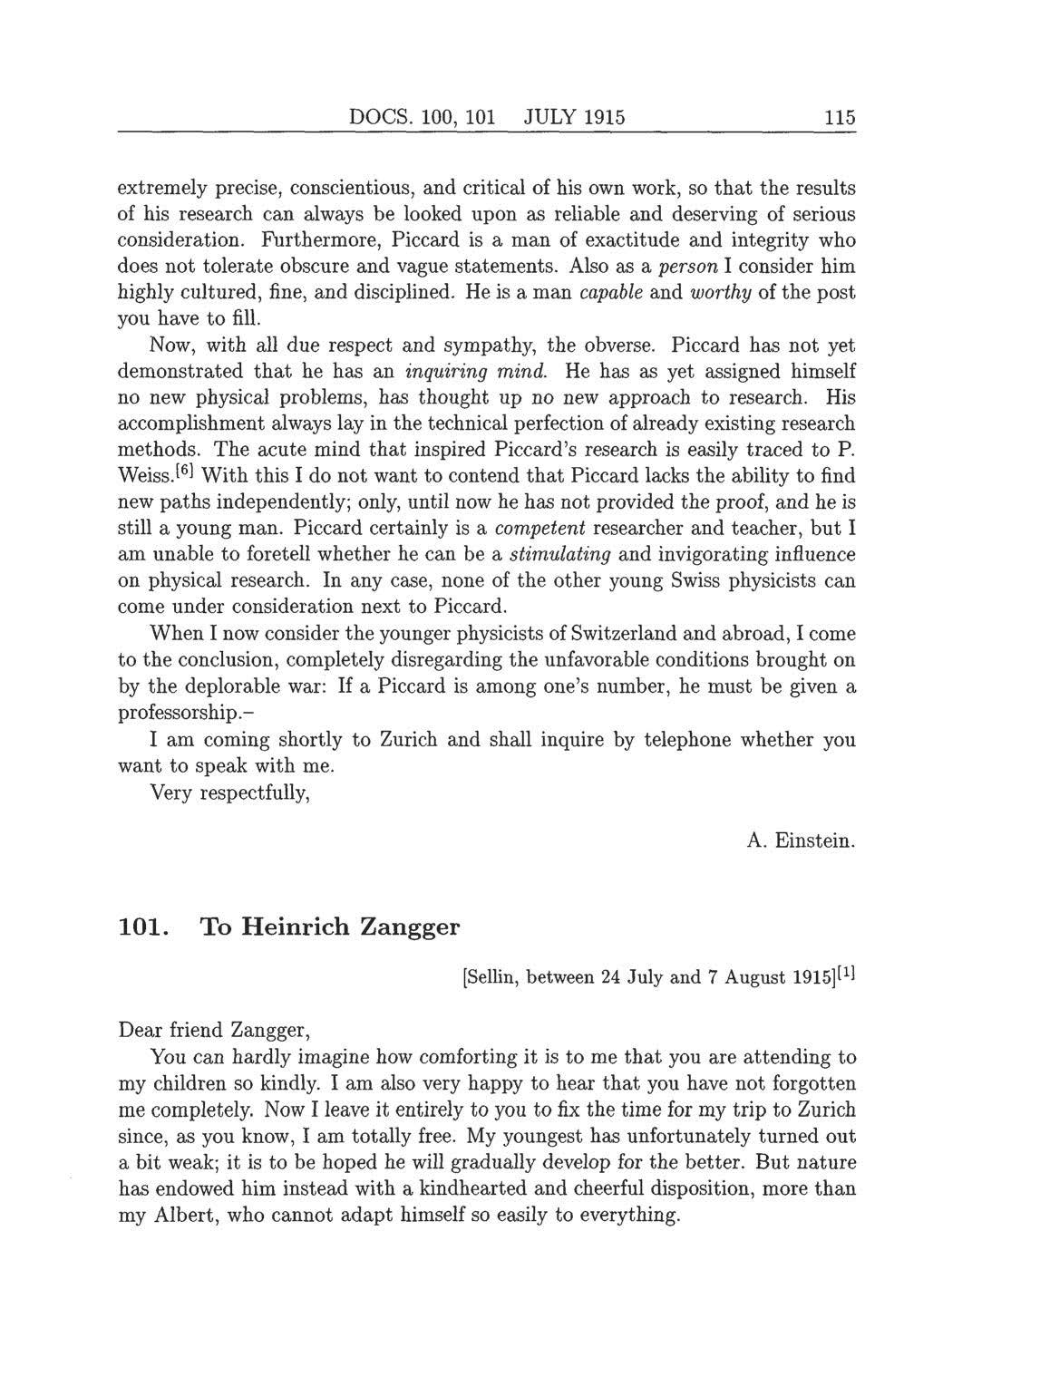 Volume 8: The Berlin Years: Correspondence, 1914-1918 (English translation supplement) page 115